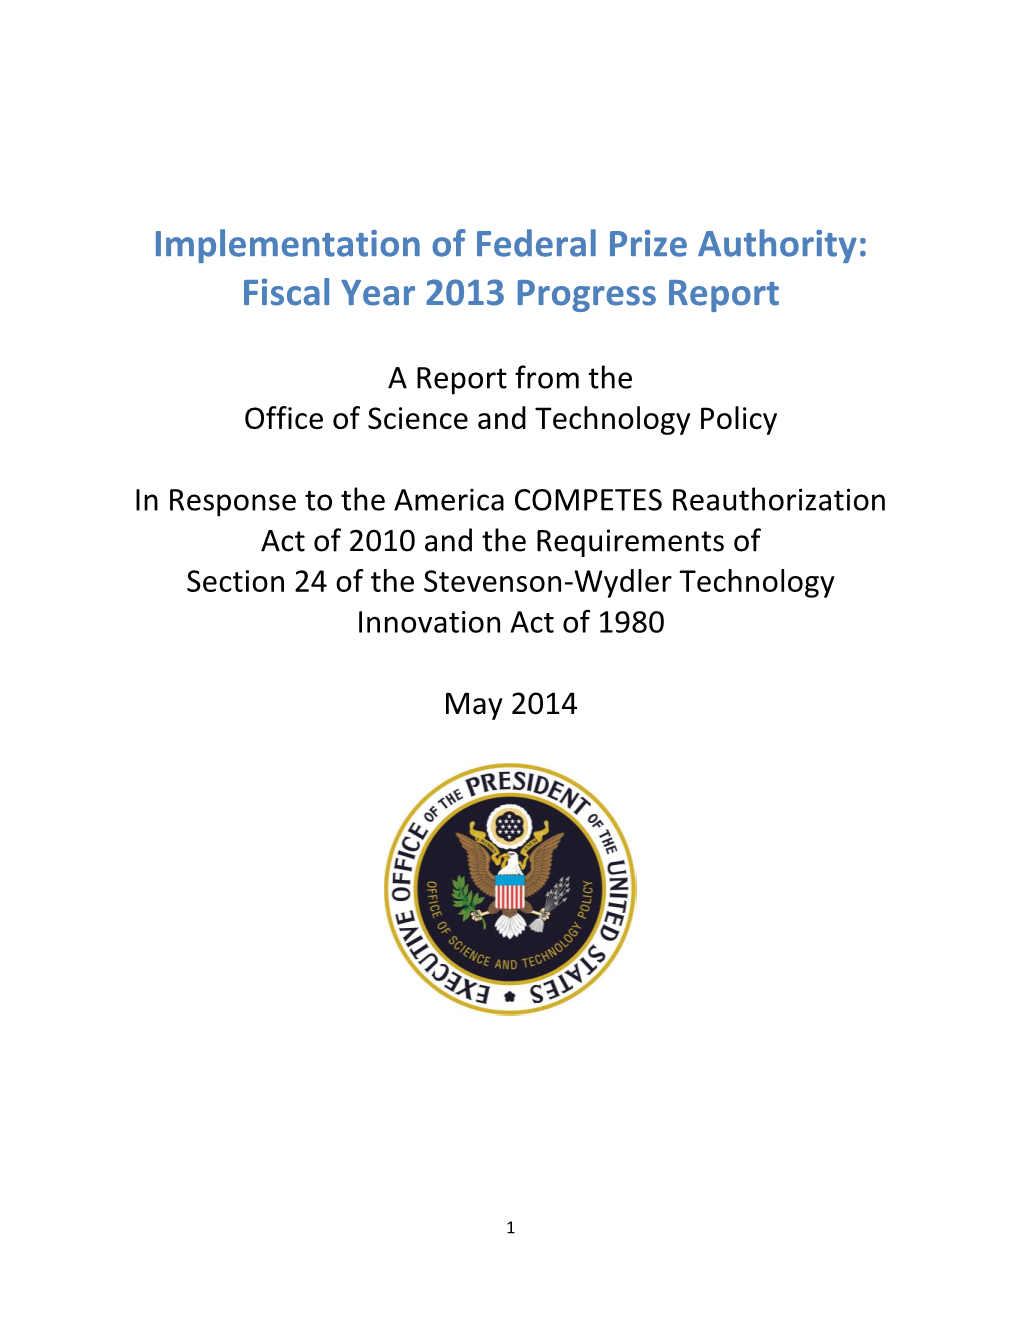 Implementation of Federal Prize Authority: Fiscal Year 2013 Progress Report